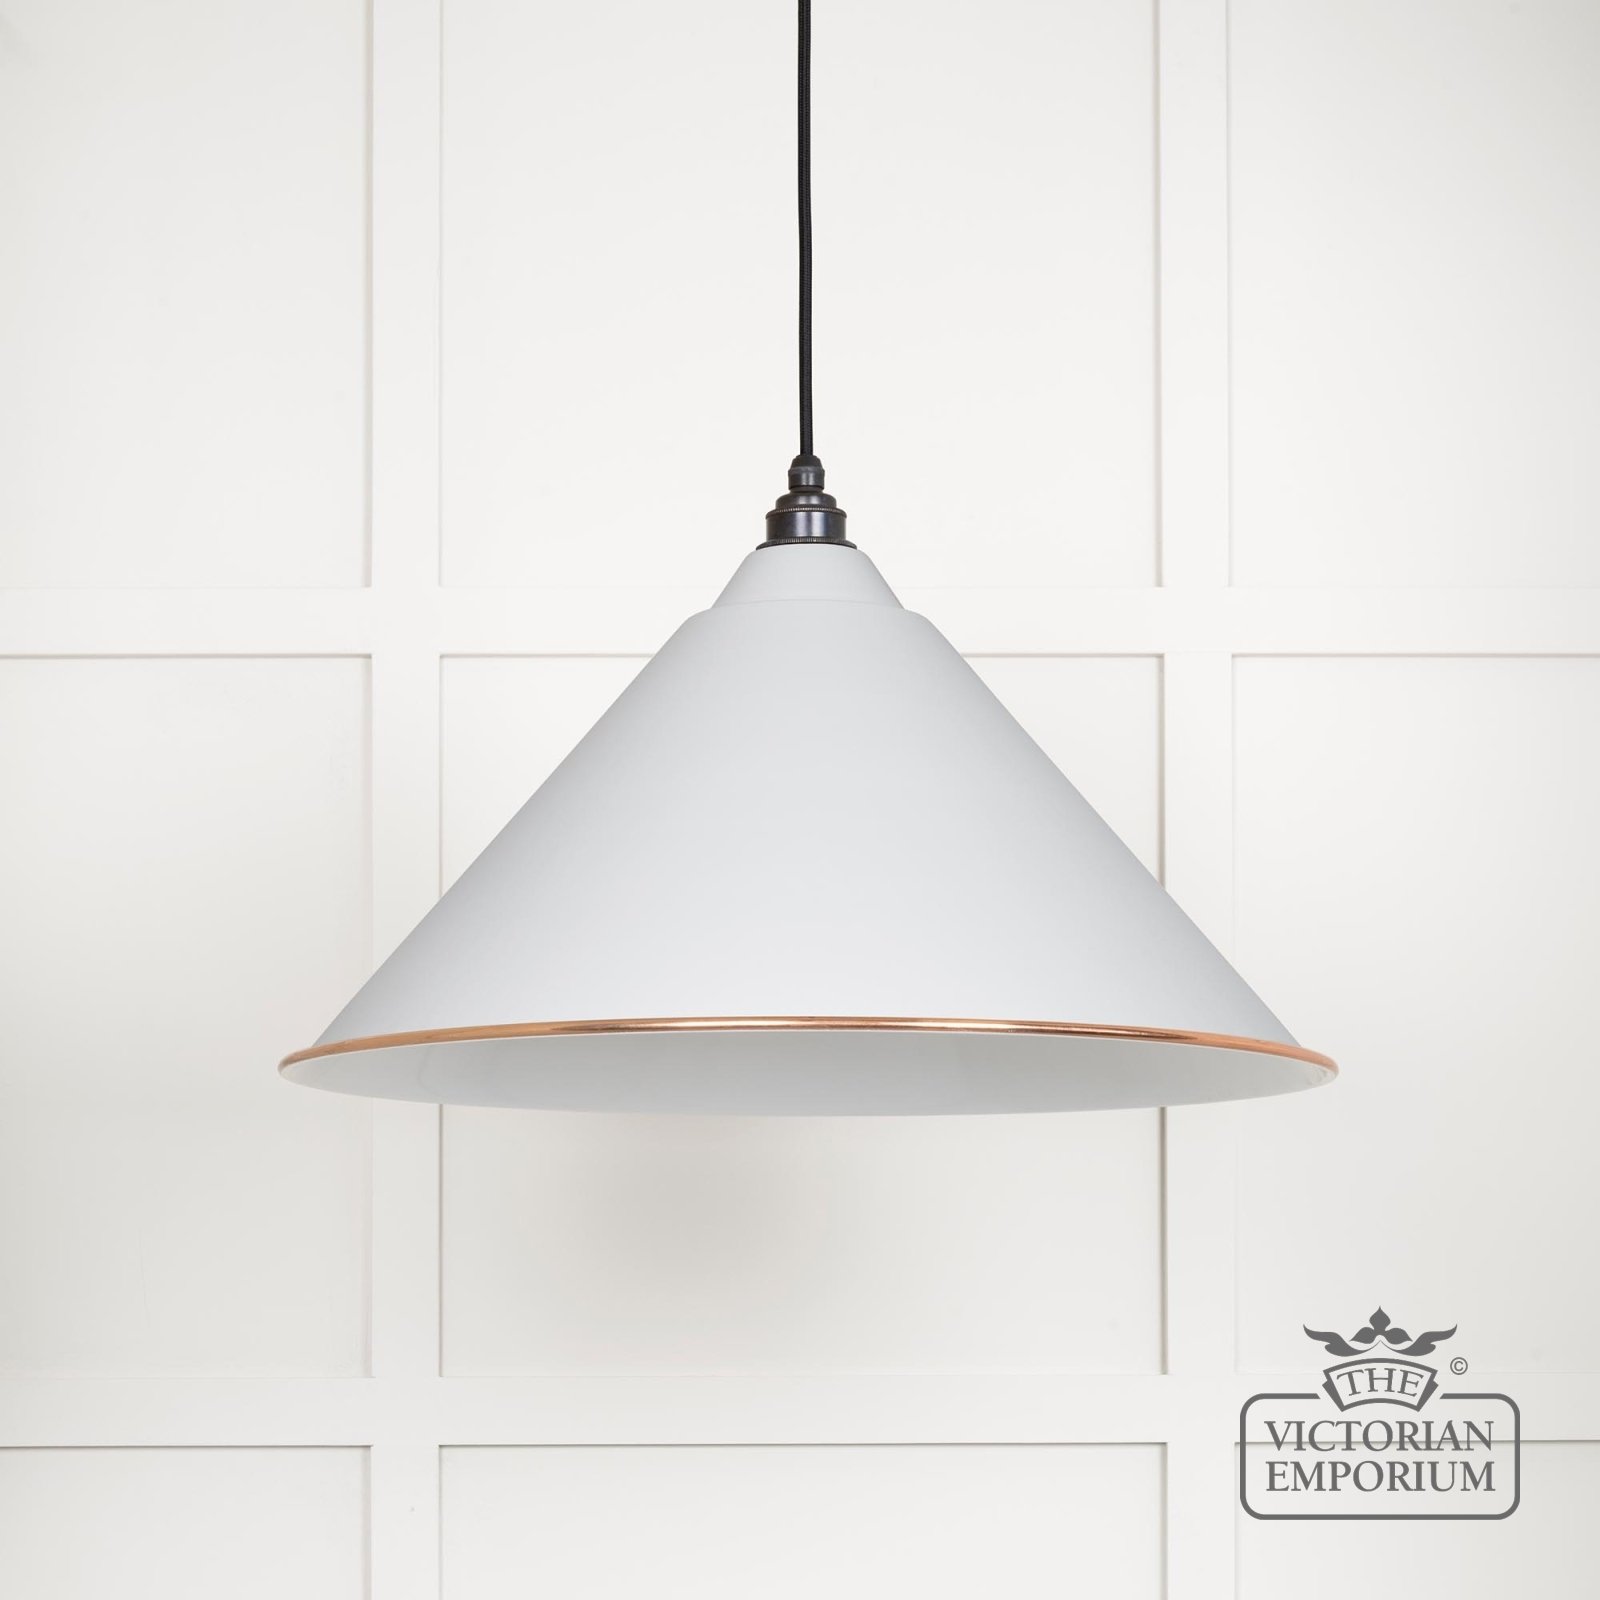 Hockliffe pendant light in Flock and White gloss interior